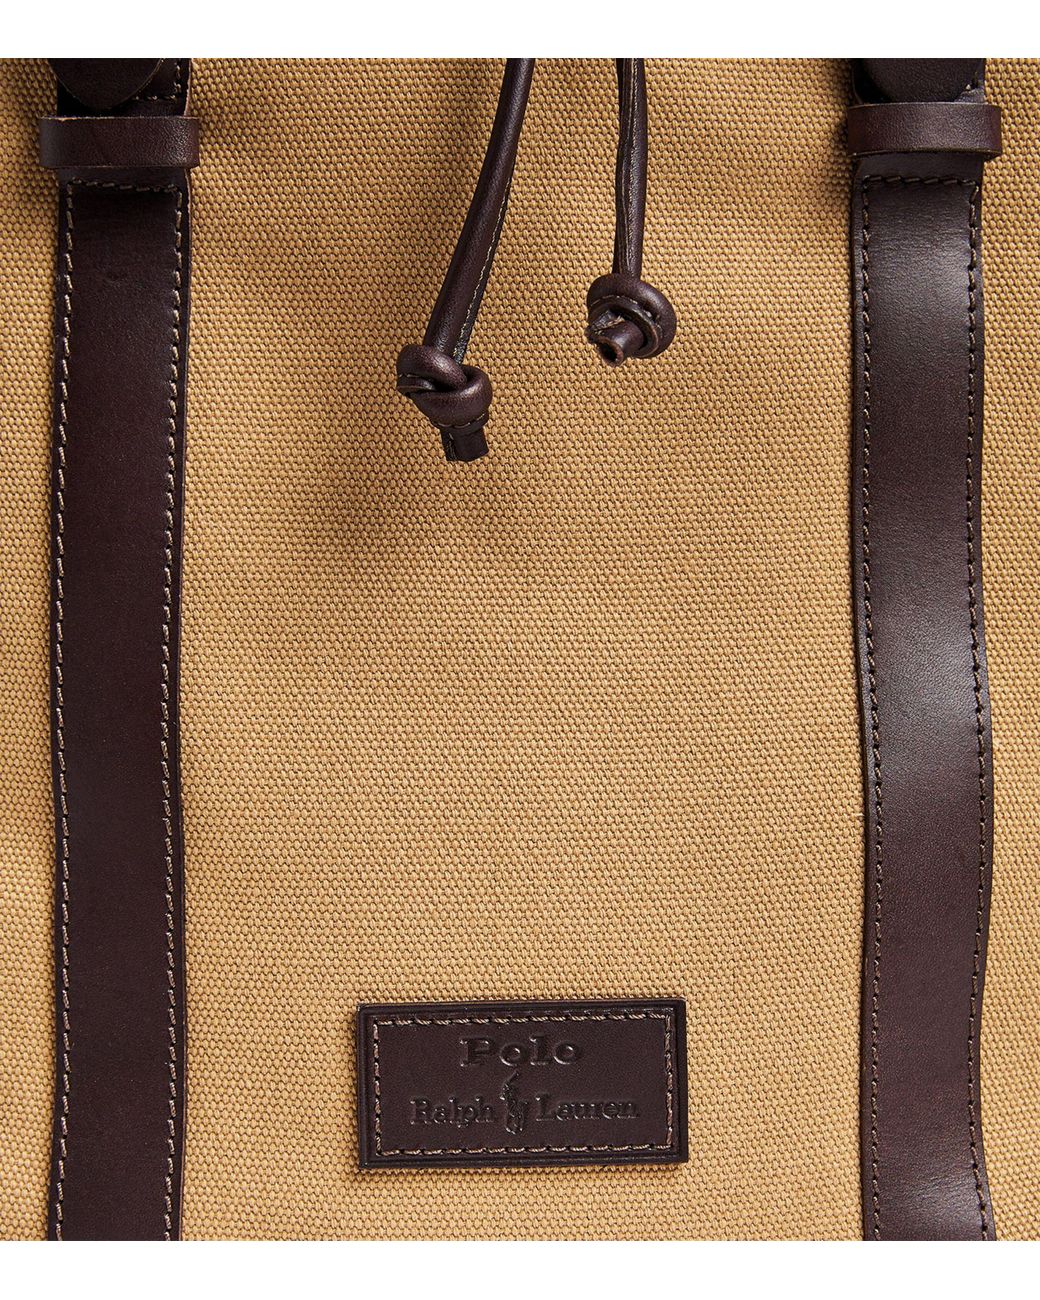 Polo Ralph Lauren Leather-Trimmed Canvas Bag in Blue for Men